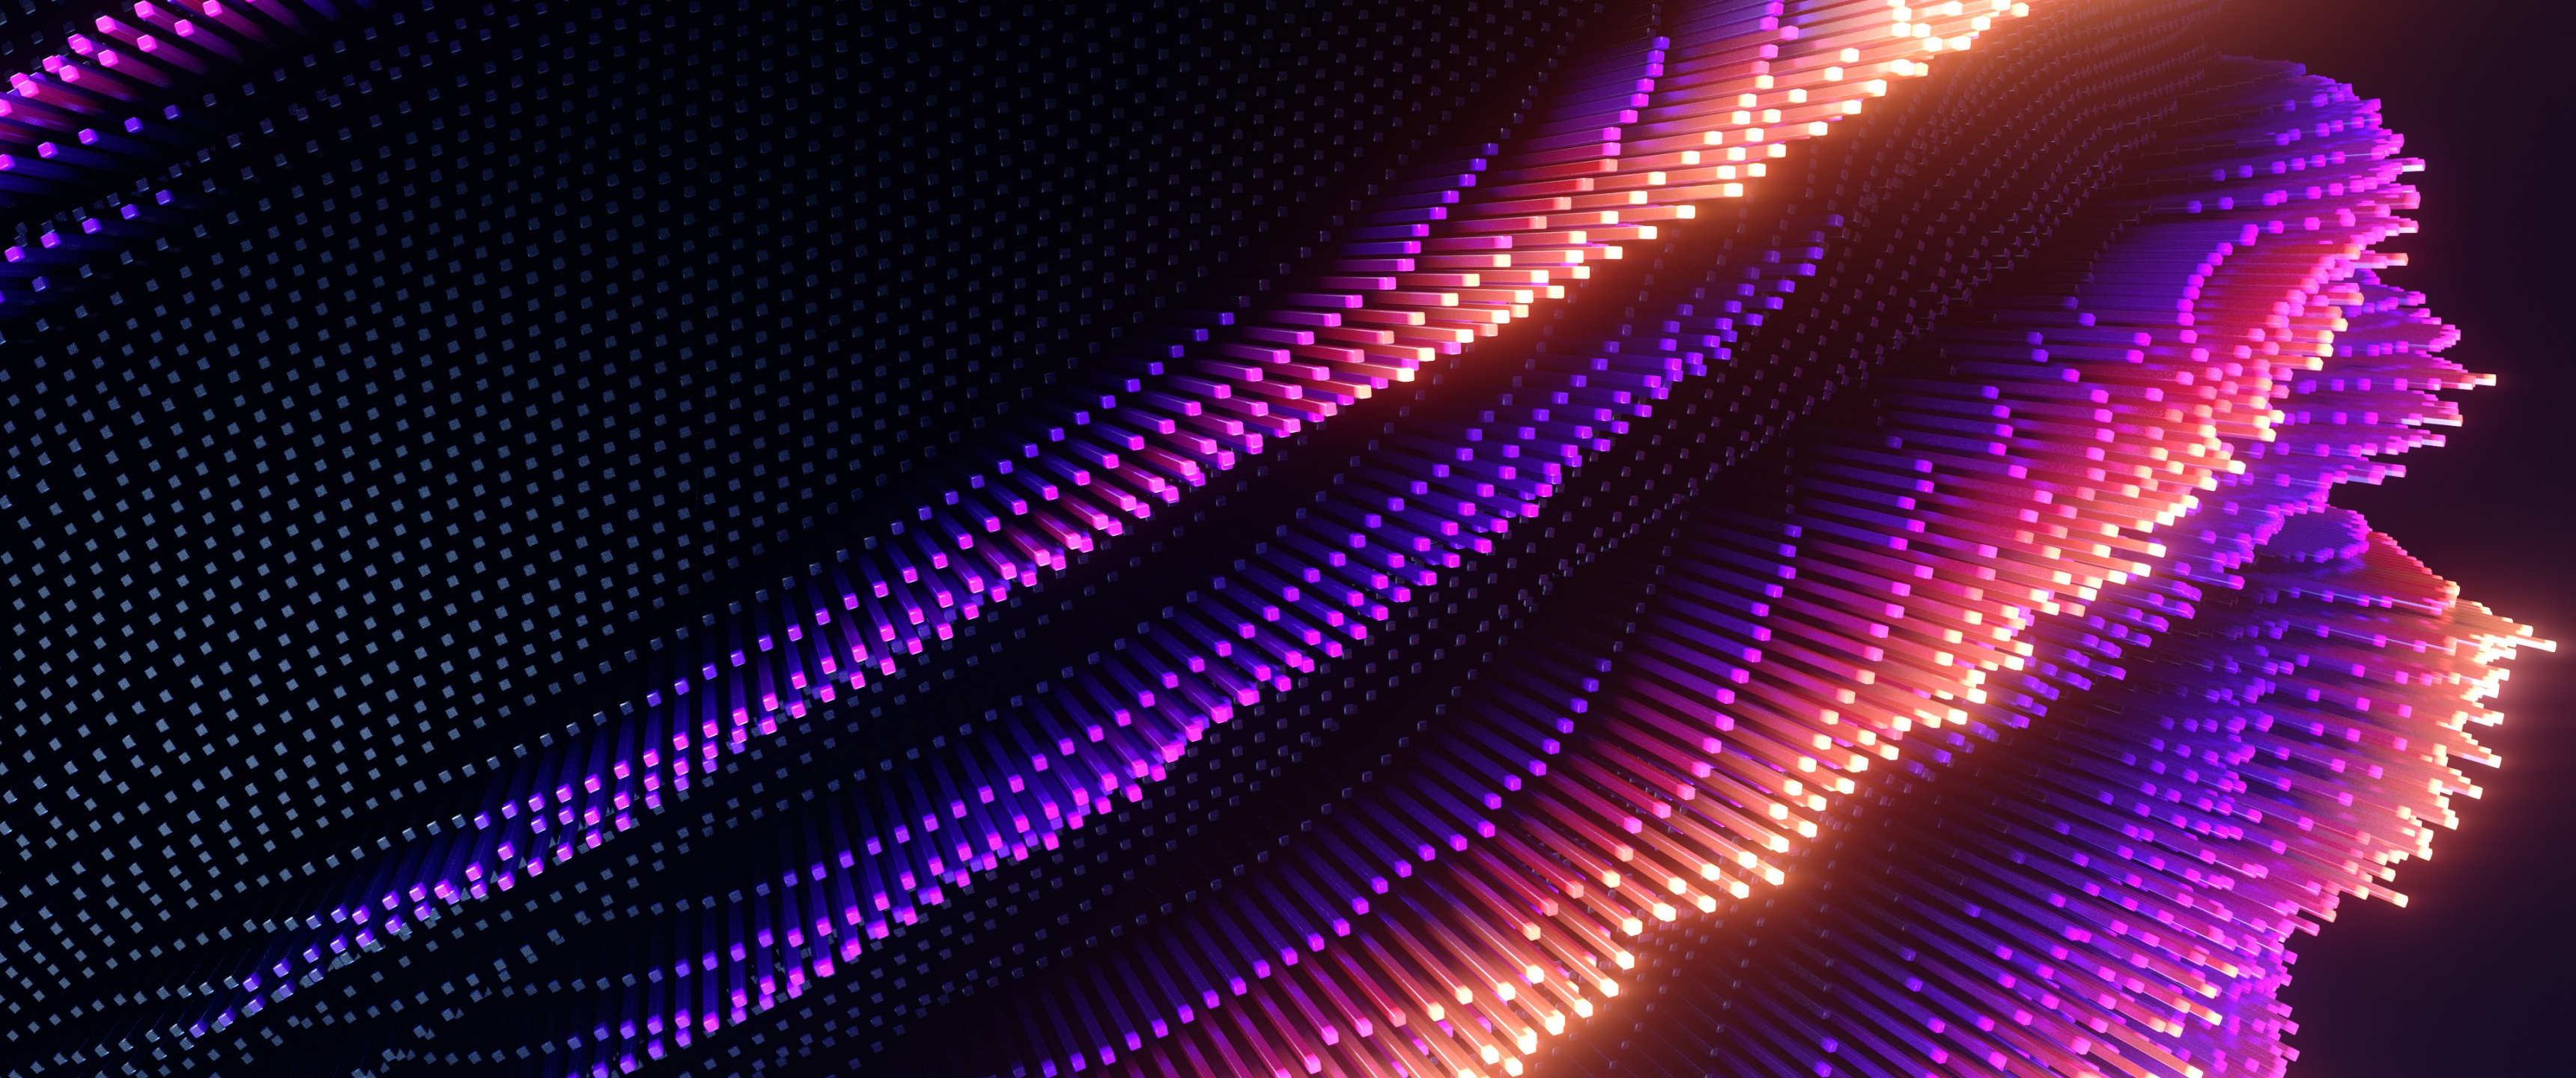 Rays Wallpaper 4K, Colorful, Glowing, Abstract, #2292